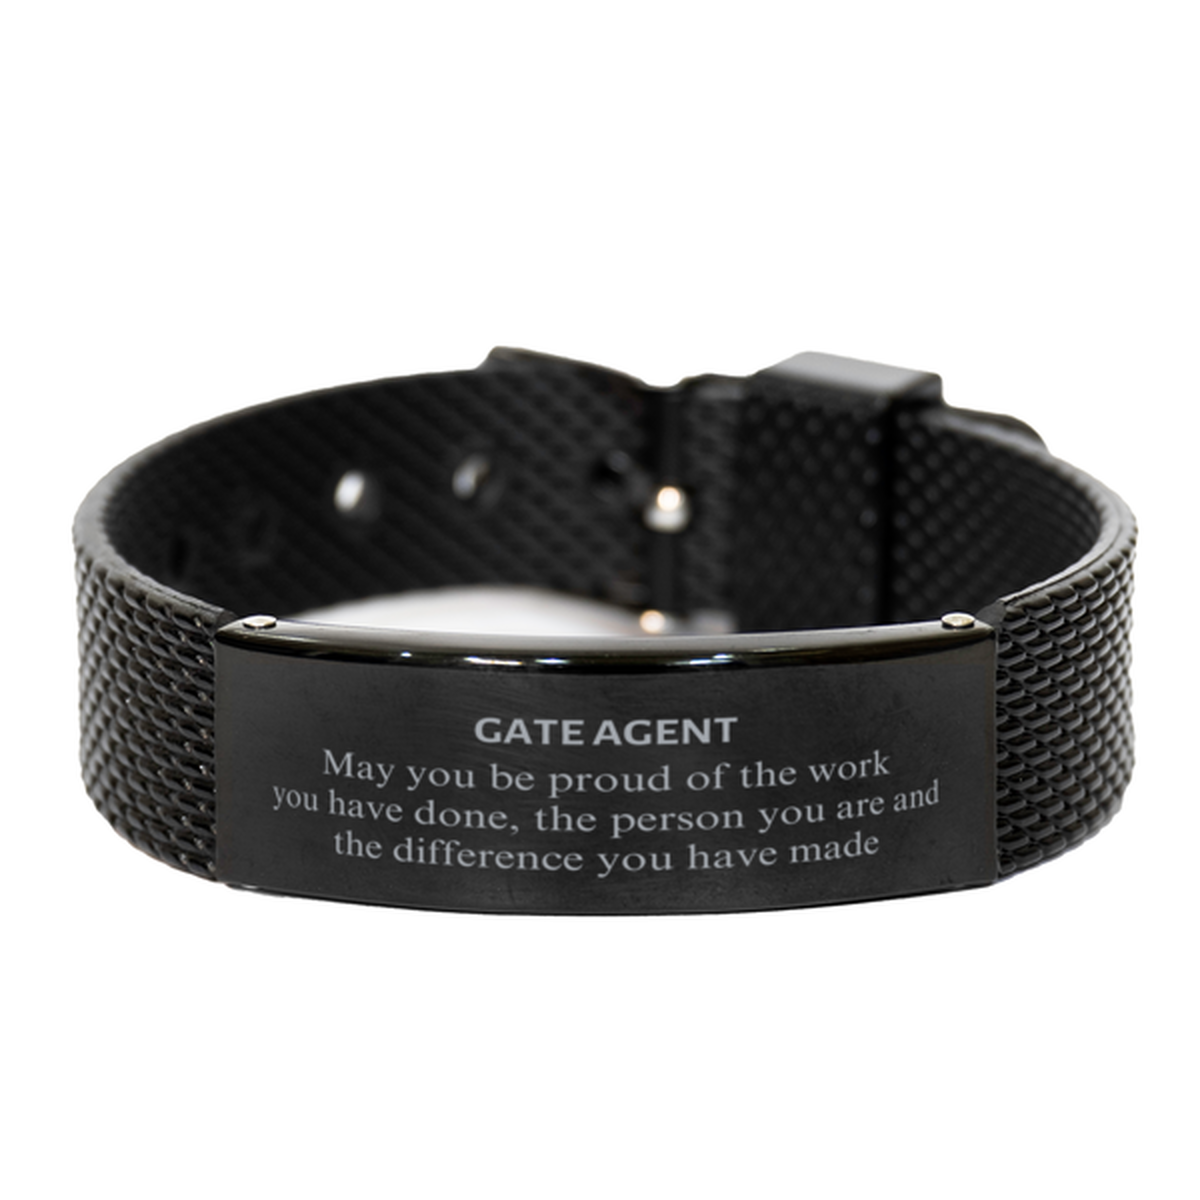 Gate Agent May you be proud of the work you have done, Retirement Gate Agent Black Shark Mesh Bracelet for Colleague Appreciation Gifts Amazing for Gate Agent